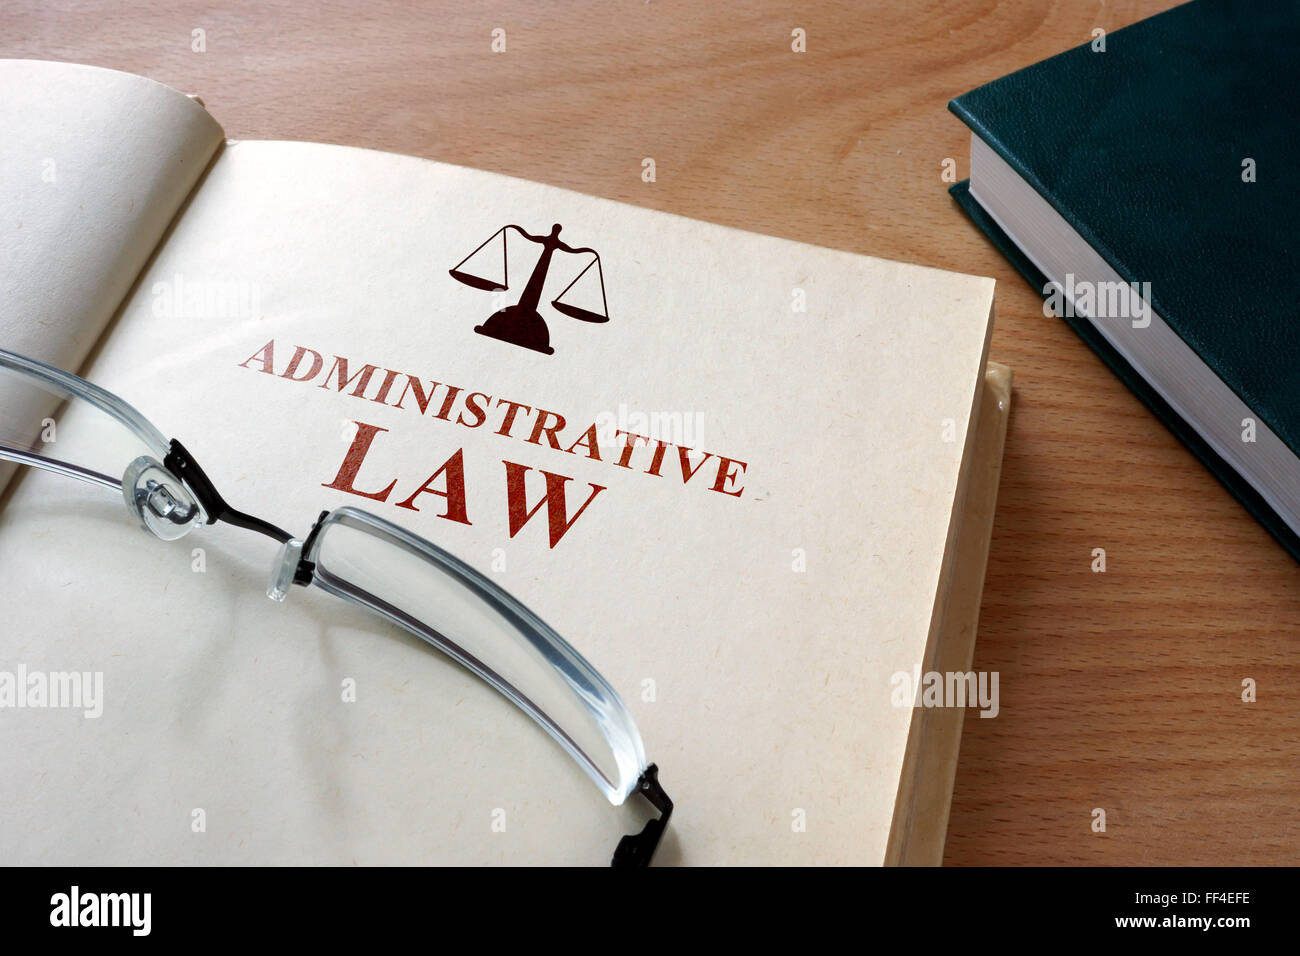 Code of  administrative law on a wooden table. Stock Photo